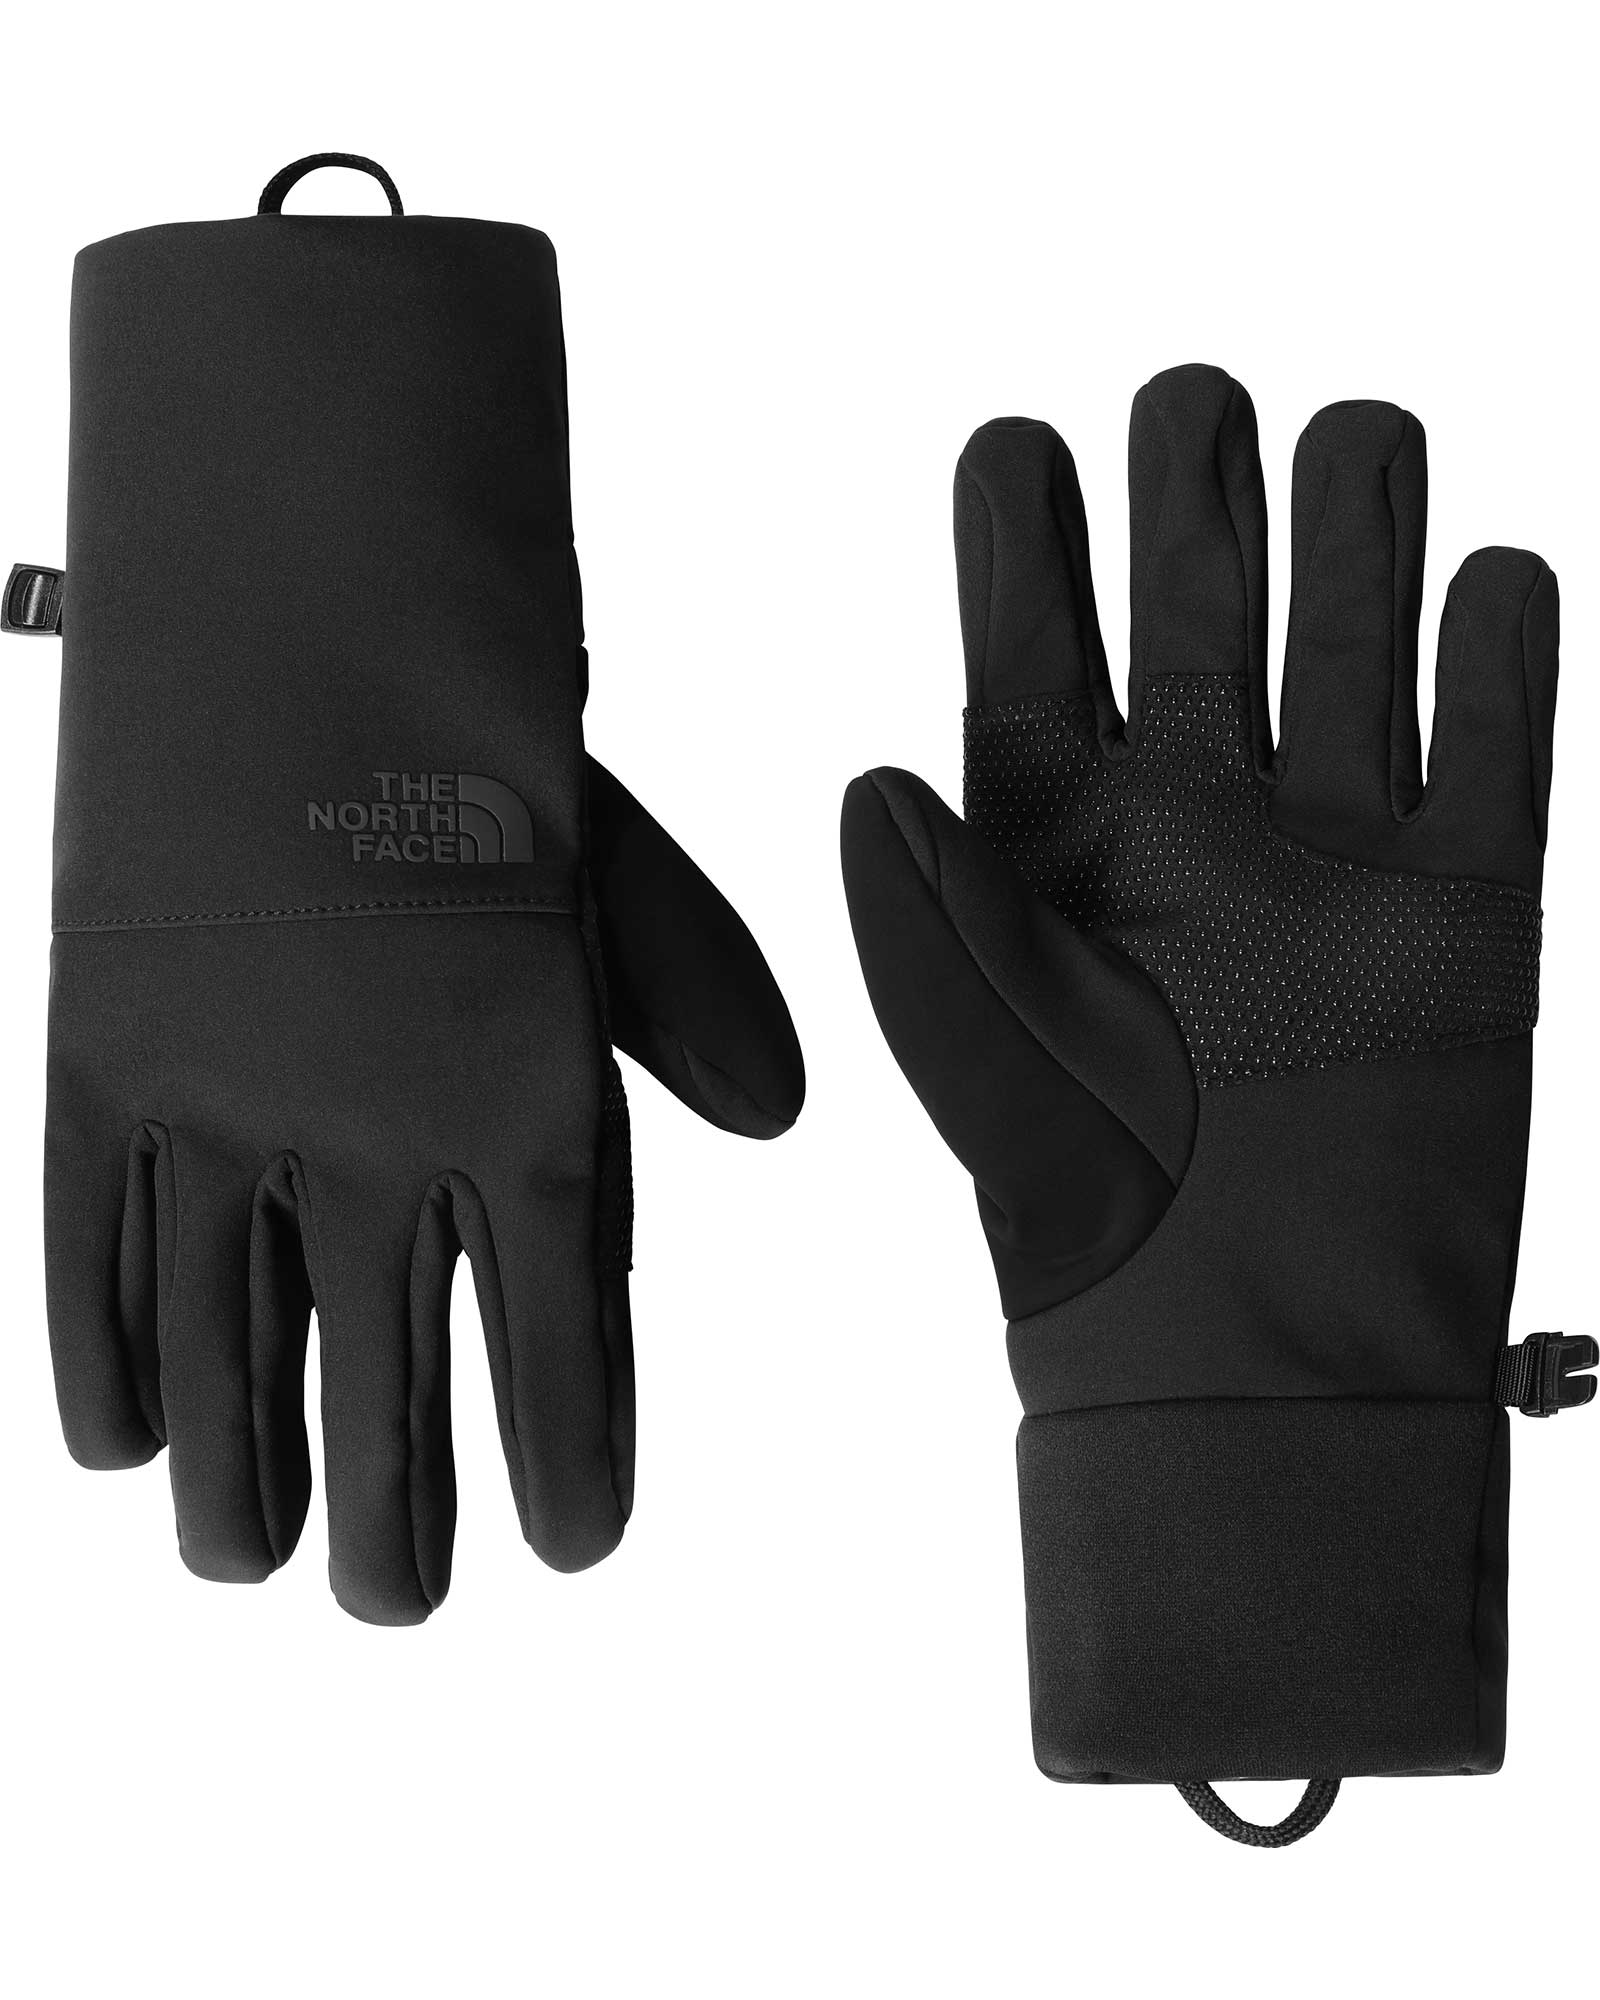 The North Face Apex Insulated Etip Men’s Gloves - TNF Black XL